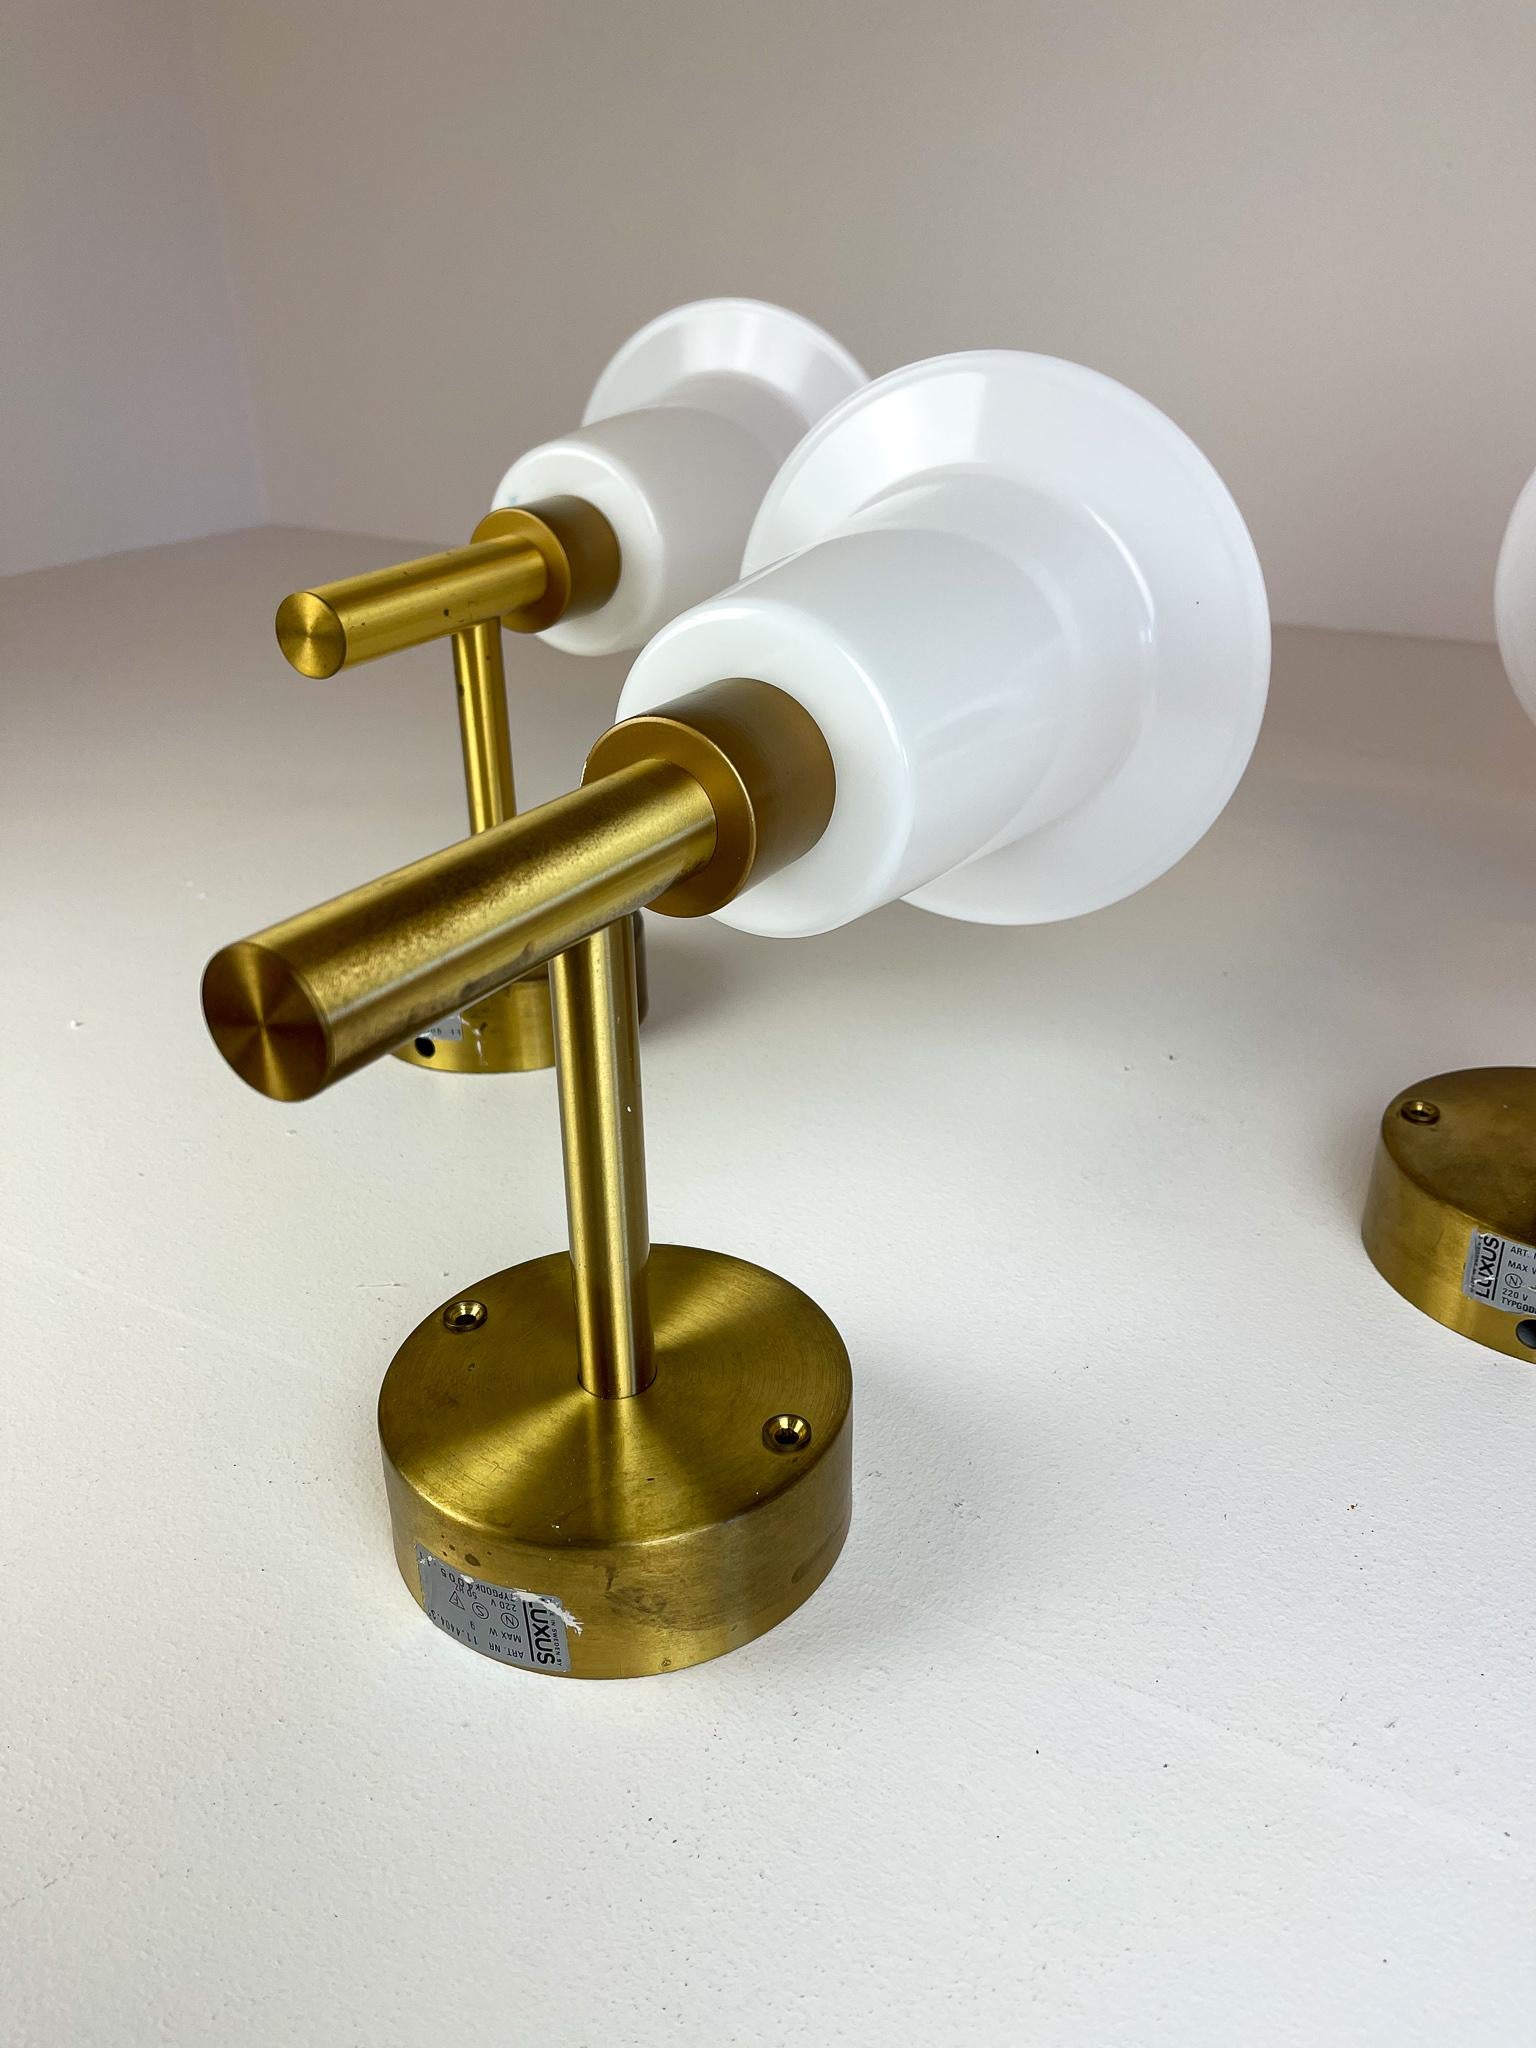 Mid-20th Century Midcentury Wall-Mounted Brass and Acrylic Lamps Luxus, Sweden, 1960s For Sale